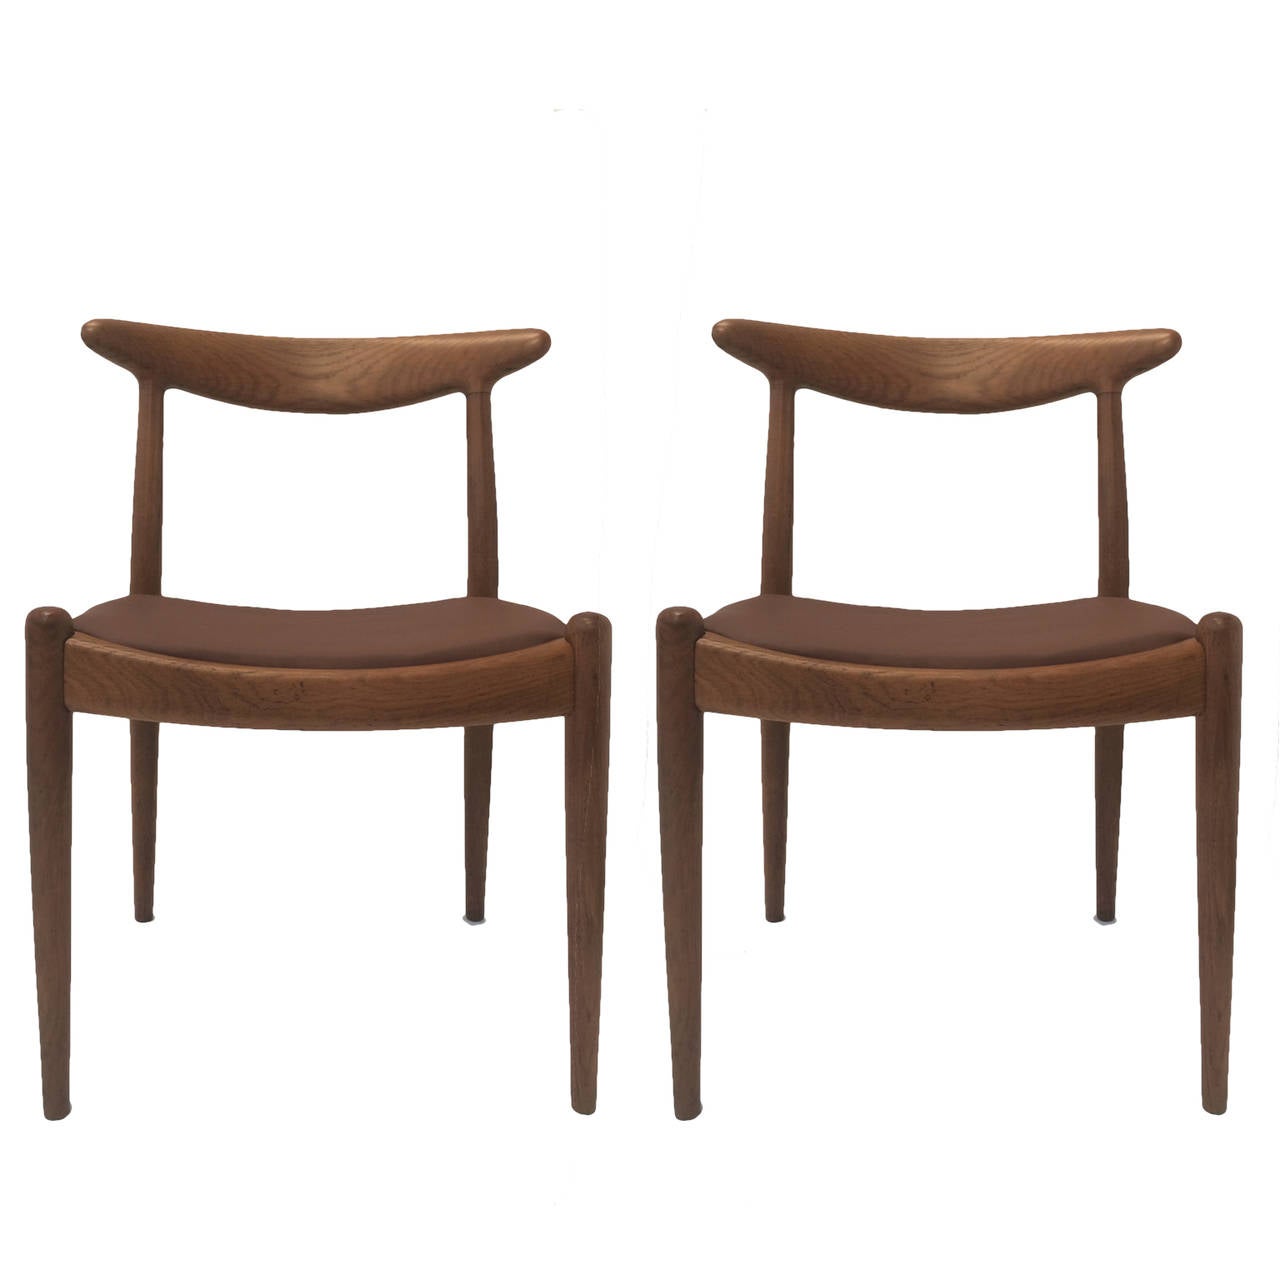 Mid-20th Century Pair of Hans Wegner W2 Dining or Desk Chairs in Oak